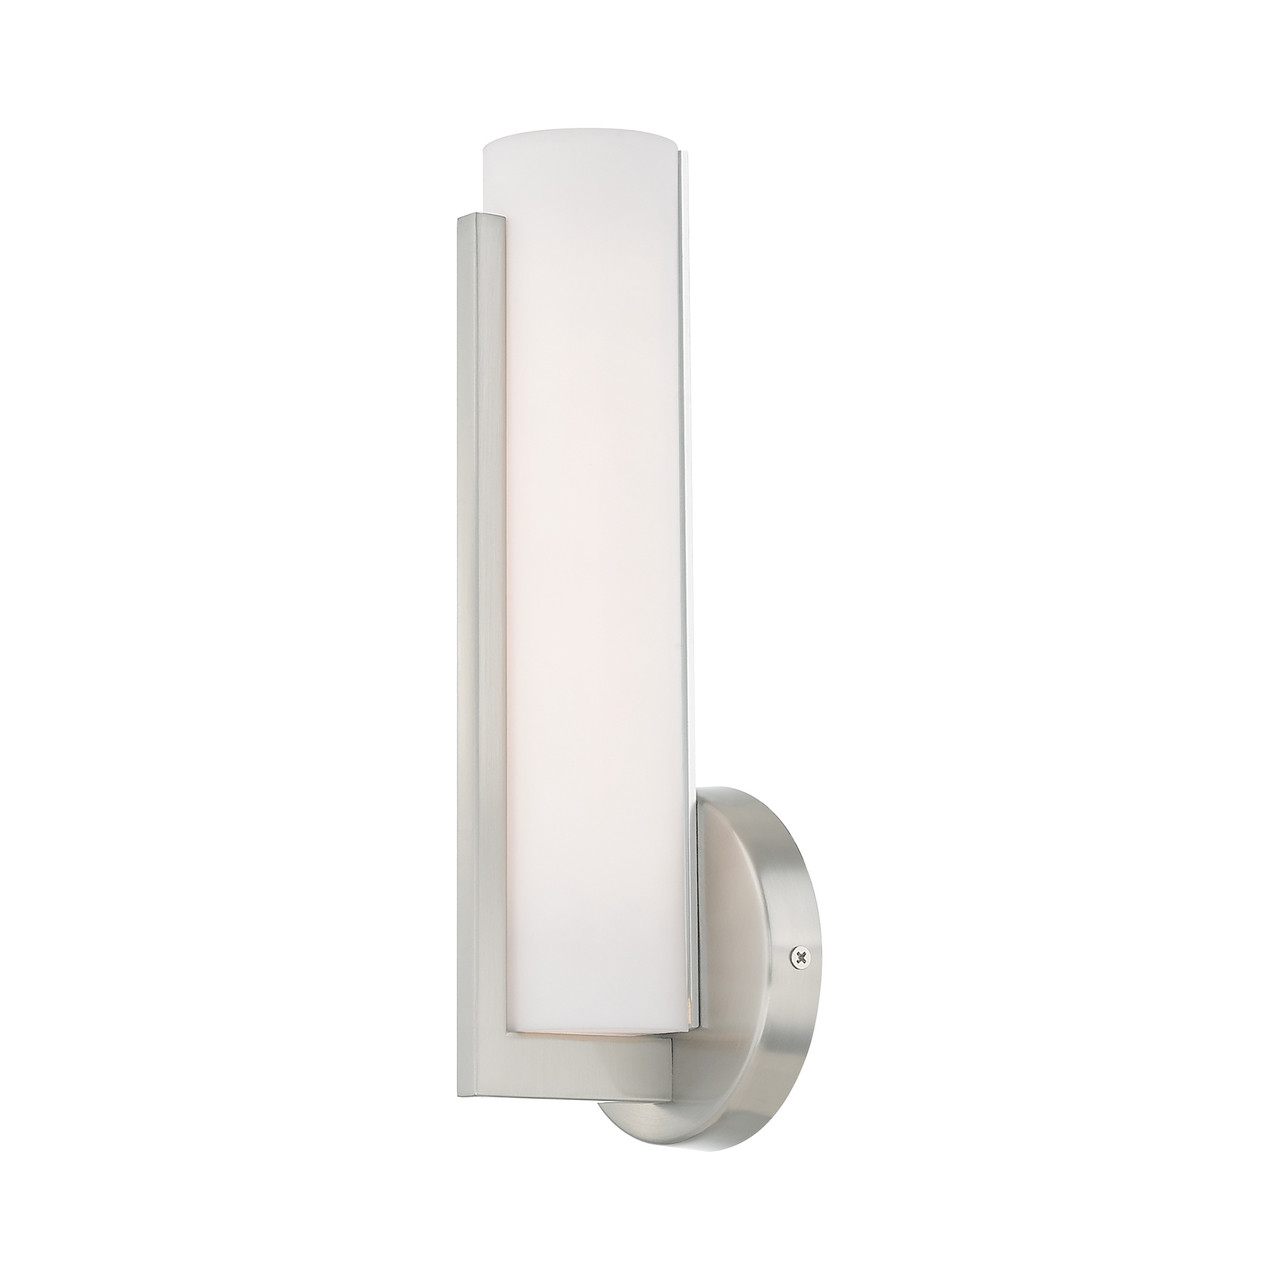 LIVEX LIGHTING 10351-91 10W LED Brushed Nickel ADA Wall Sconce